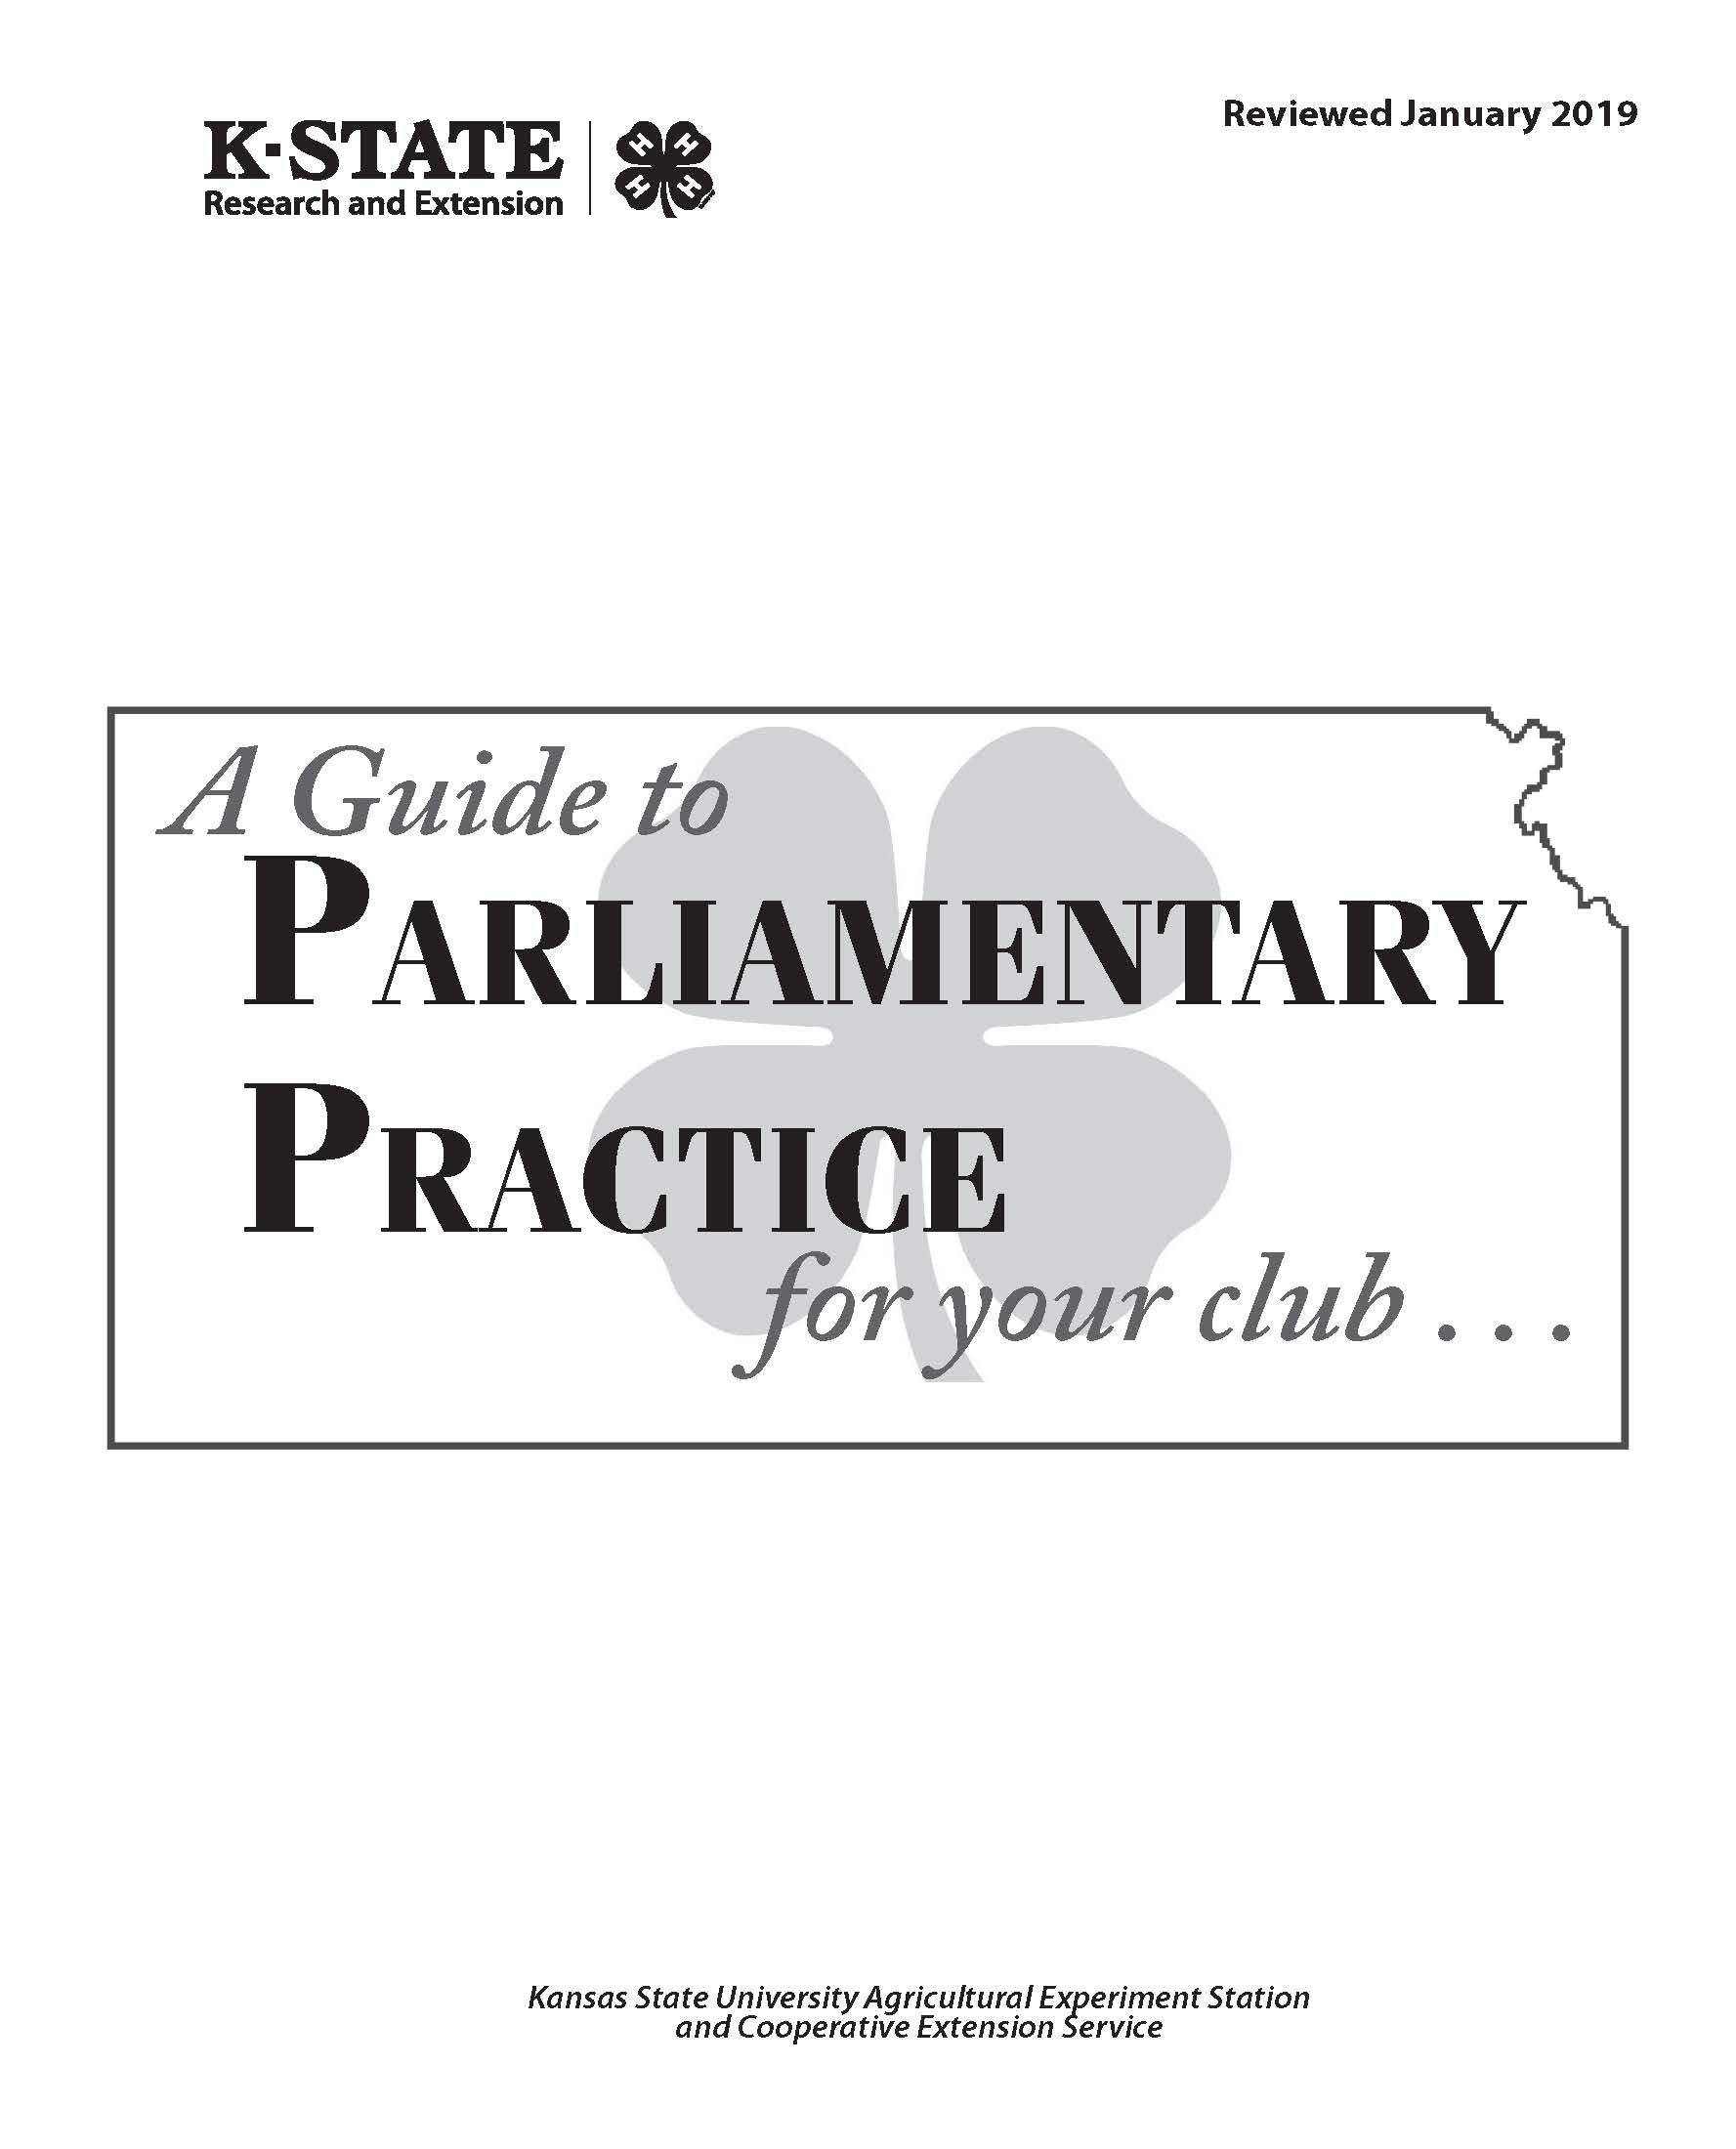 A Guide to Parlimentary Practices